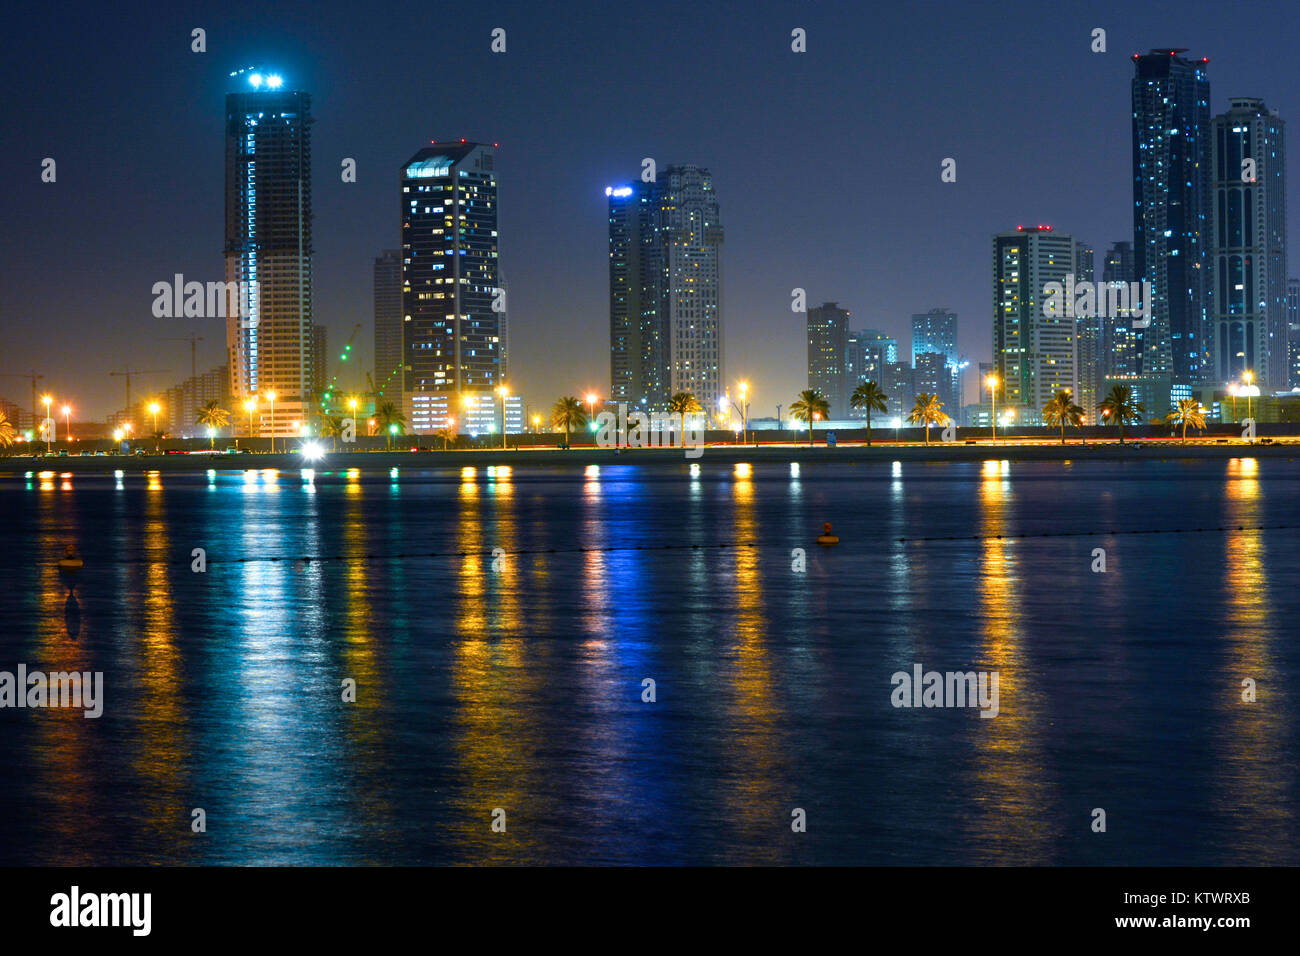 Dubai,UAE. A view from one of the beach with beautiful buildings allowing magnificent light reflection and light trail on the road beside the beach. Stock Photo